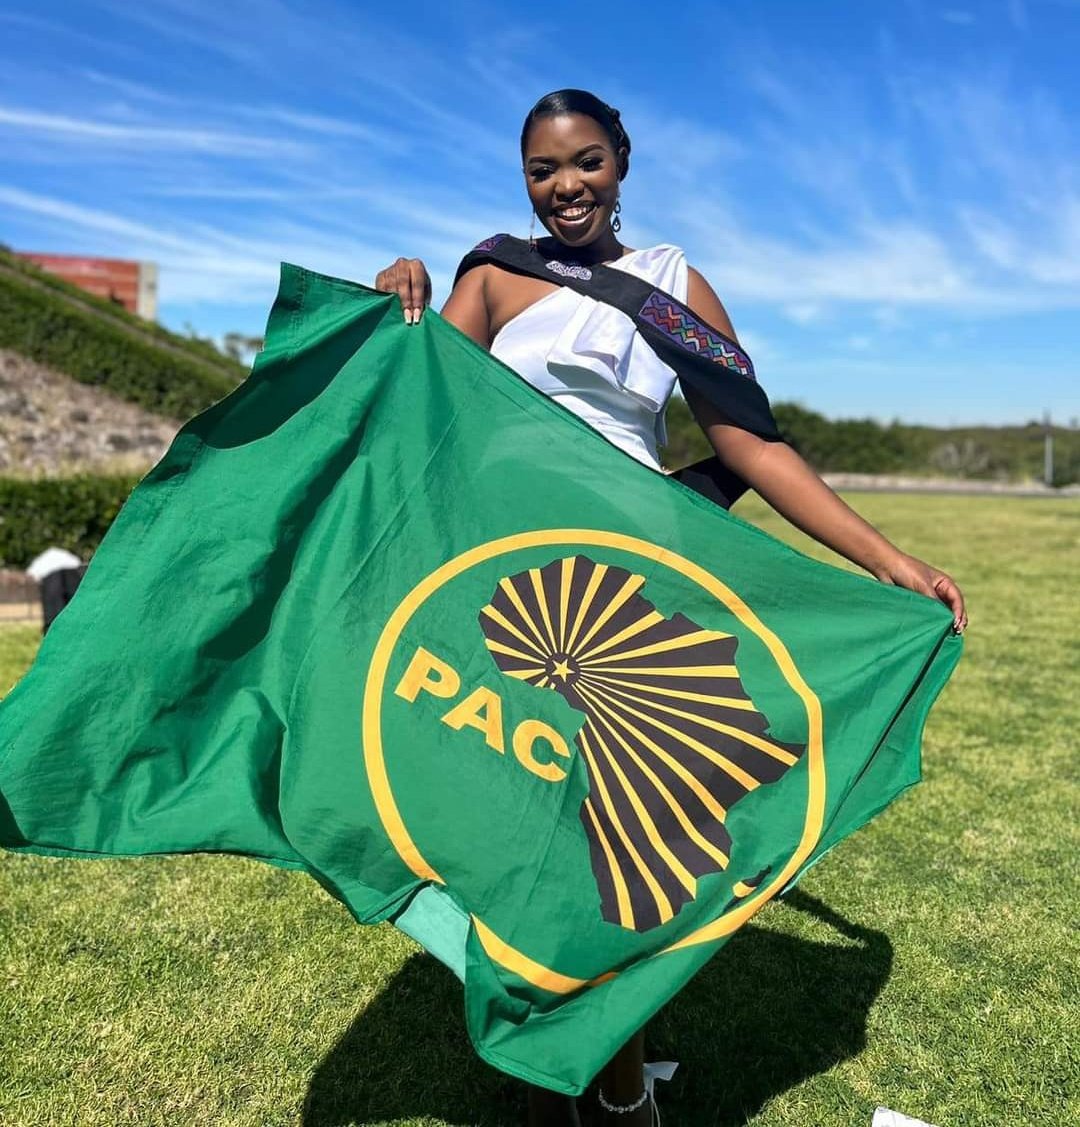 Education is the key to unlocking Africa's potential. At the Pan Africanist Congress of Azania (PAC), we love education. Join us in the journey towards a brighter, more enlightened future. #EducationForAll #VitePAC #OurLand #OurLegacy